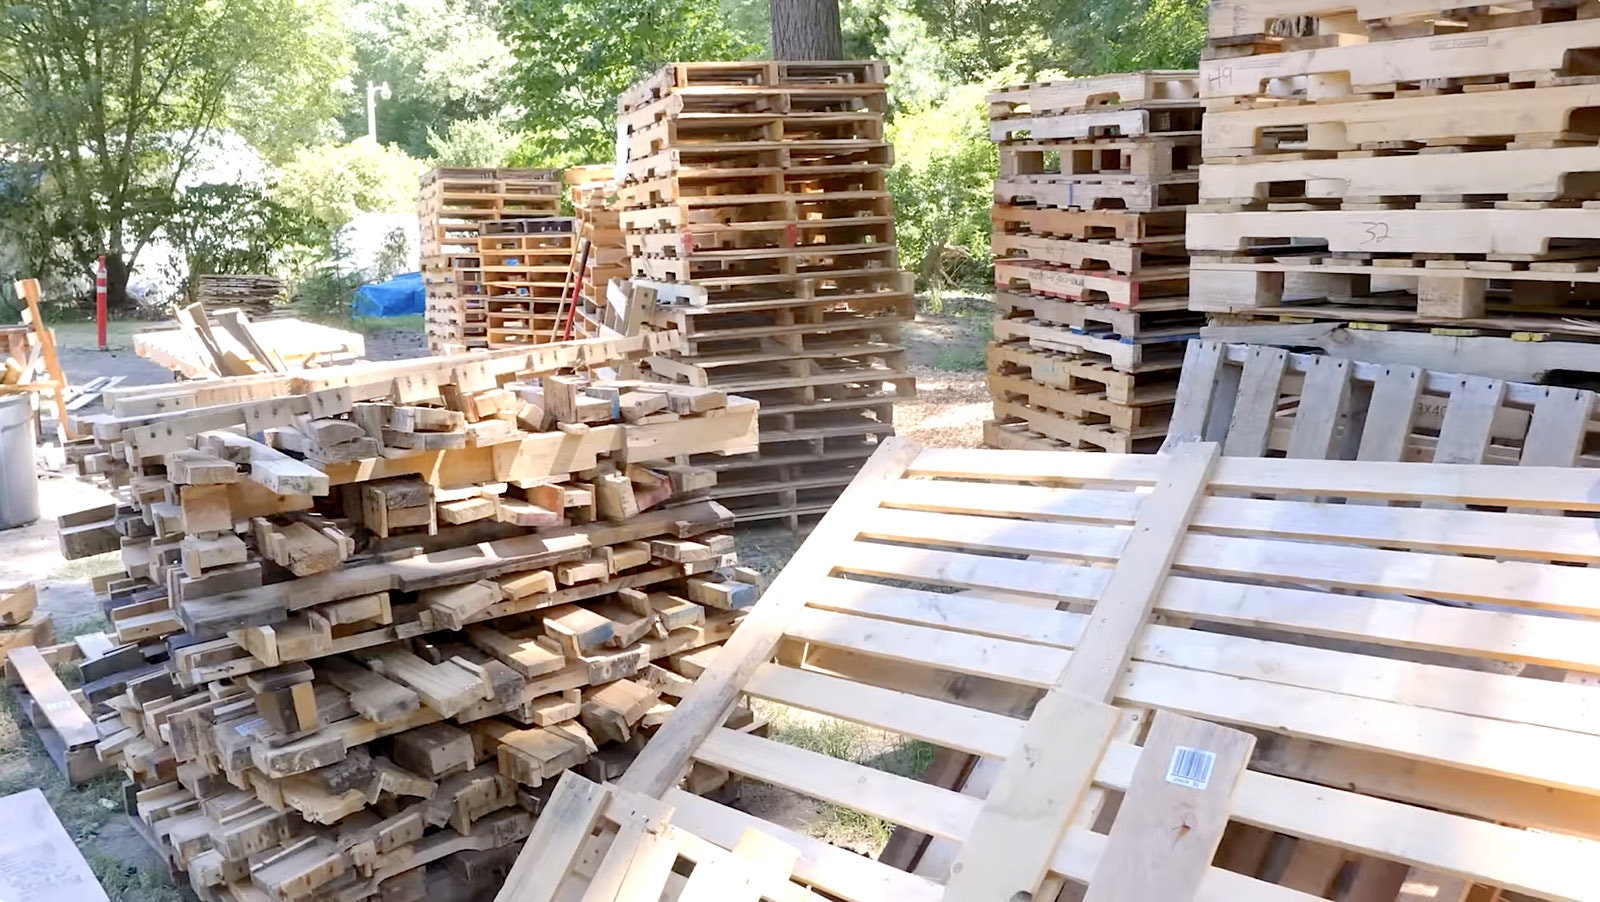 It takes a lot of repurposed pallets to make Thomas Dambo's giant trolls.